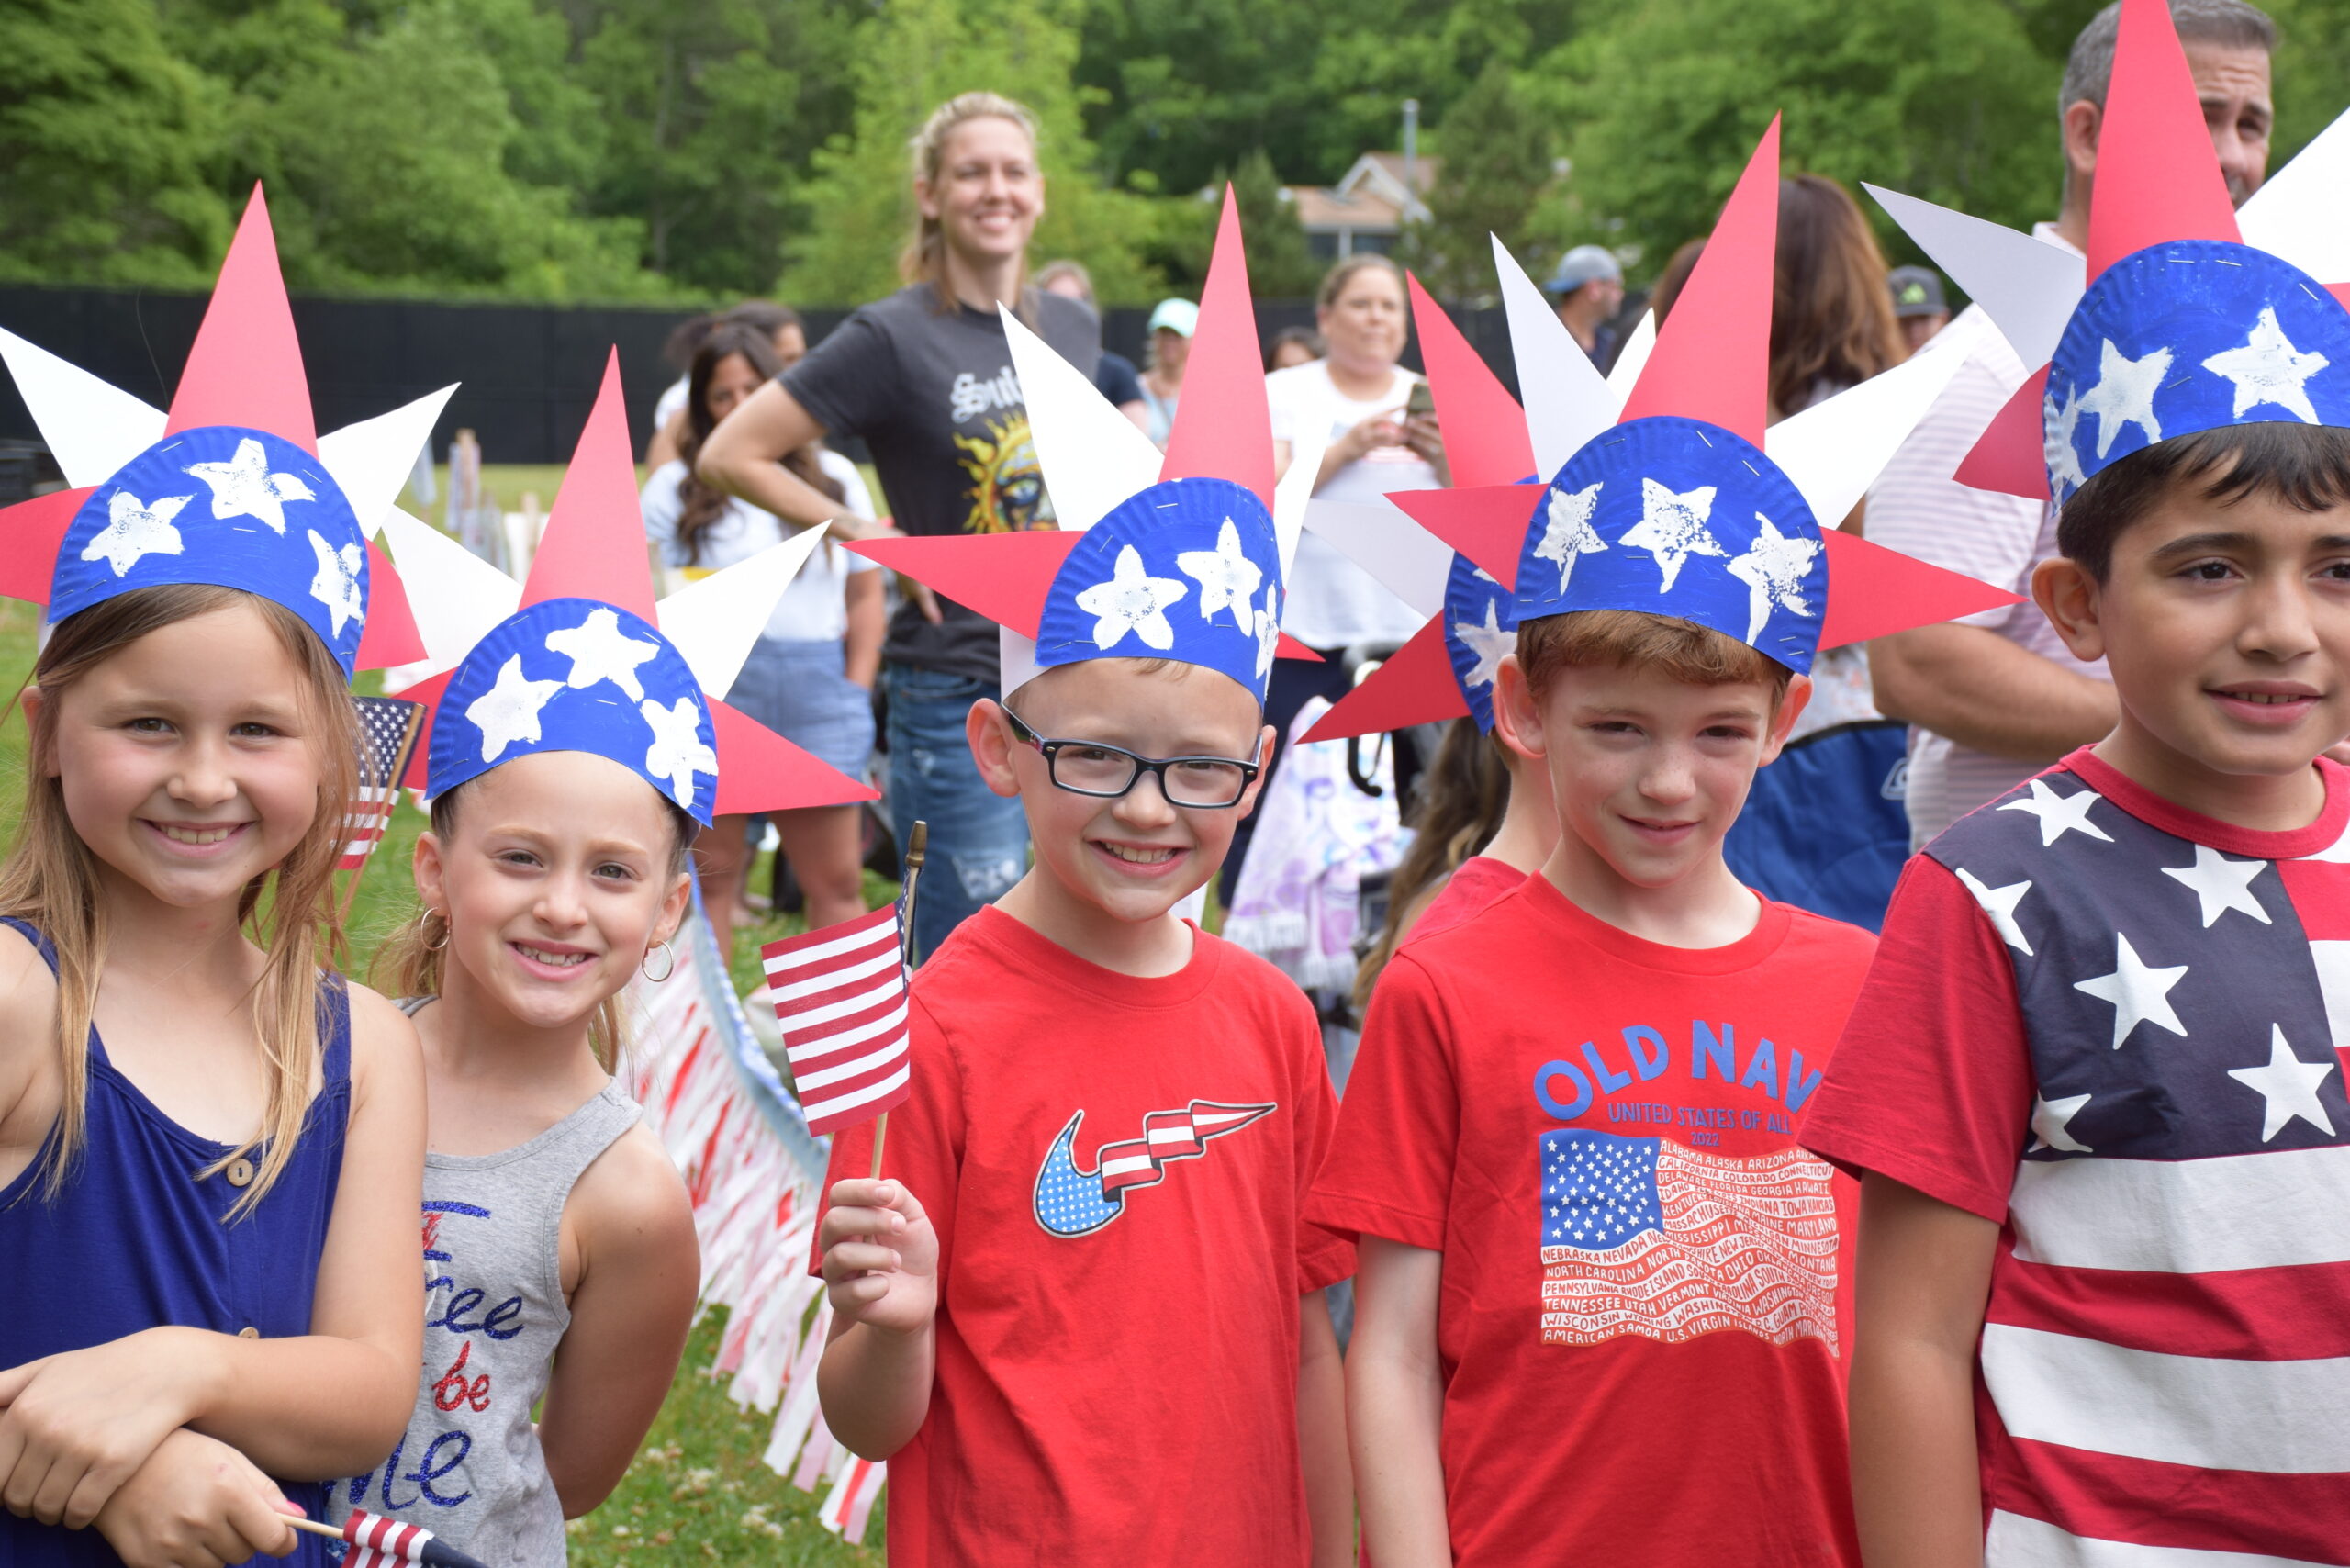 Eastport-South Manor School District elementary school students celebrated Flag Day on June 14. COURTESY EASTPORT-SOUTH MANOR SCHOOL DISTRICT